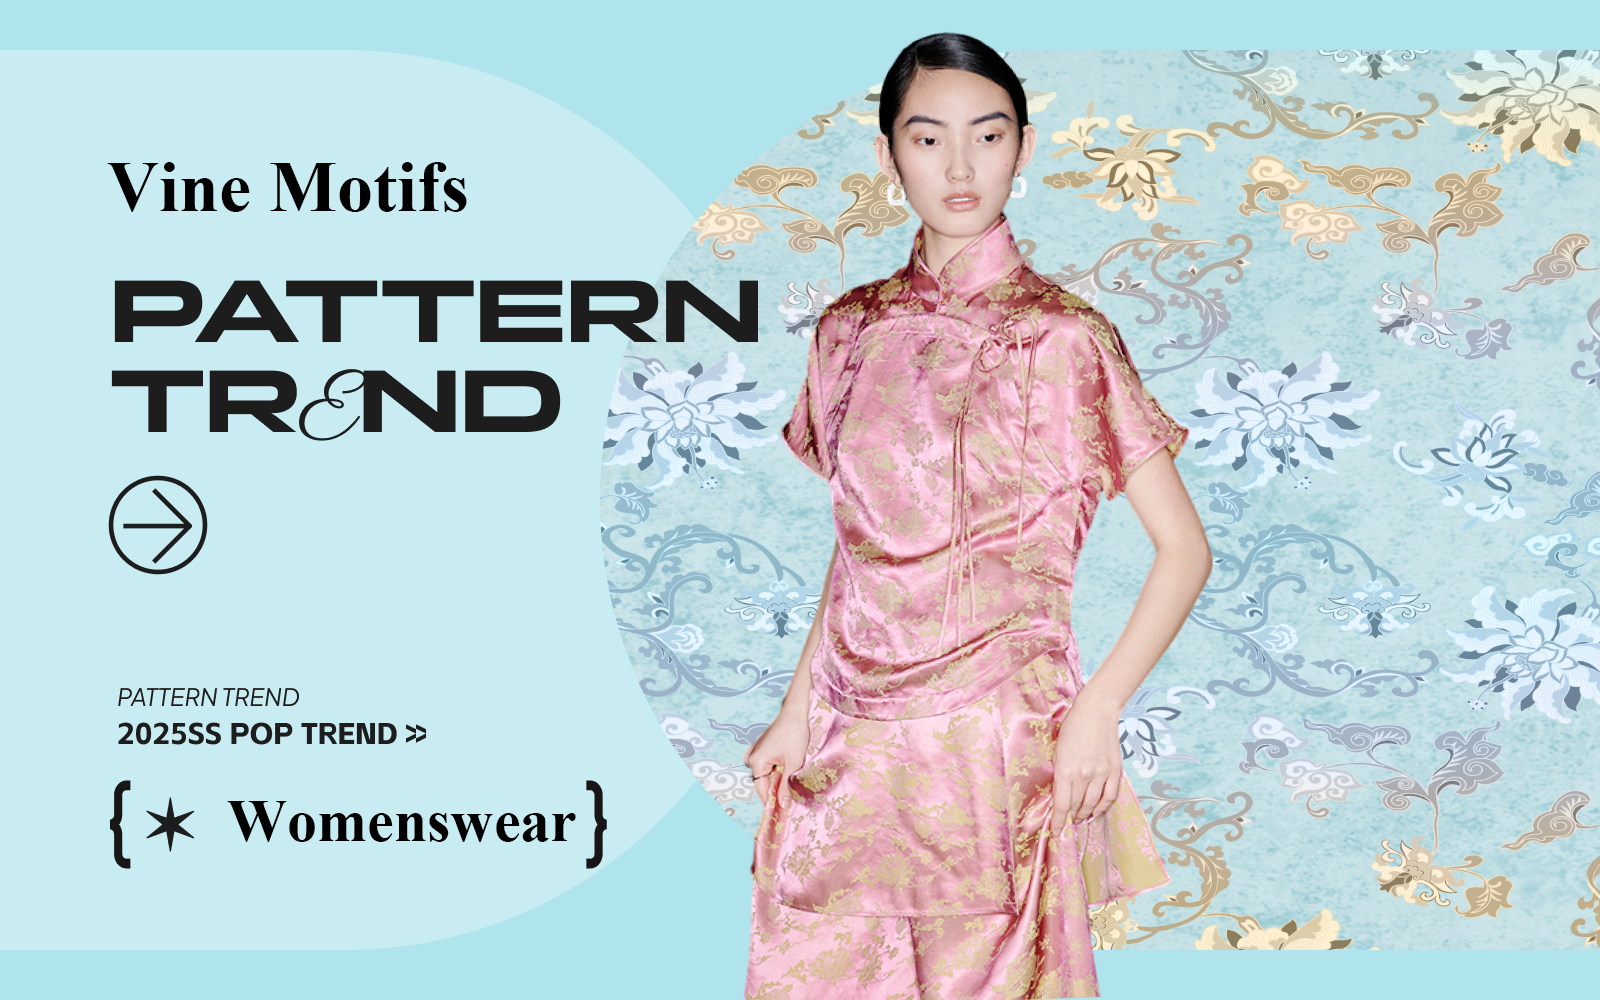 Chinese Traditional Motif I -- The Pattern Trend for Womenswear